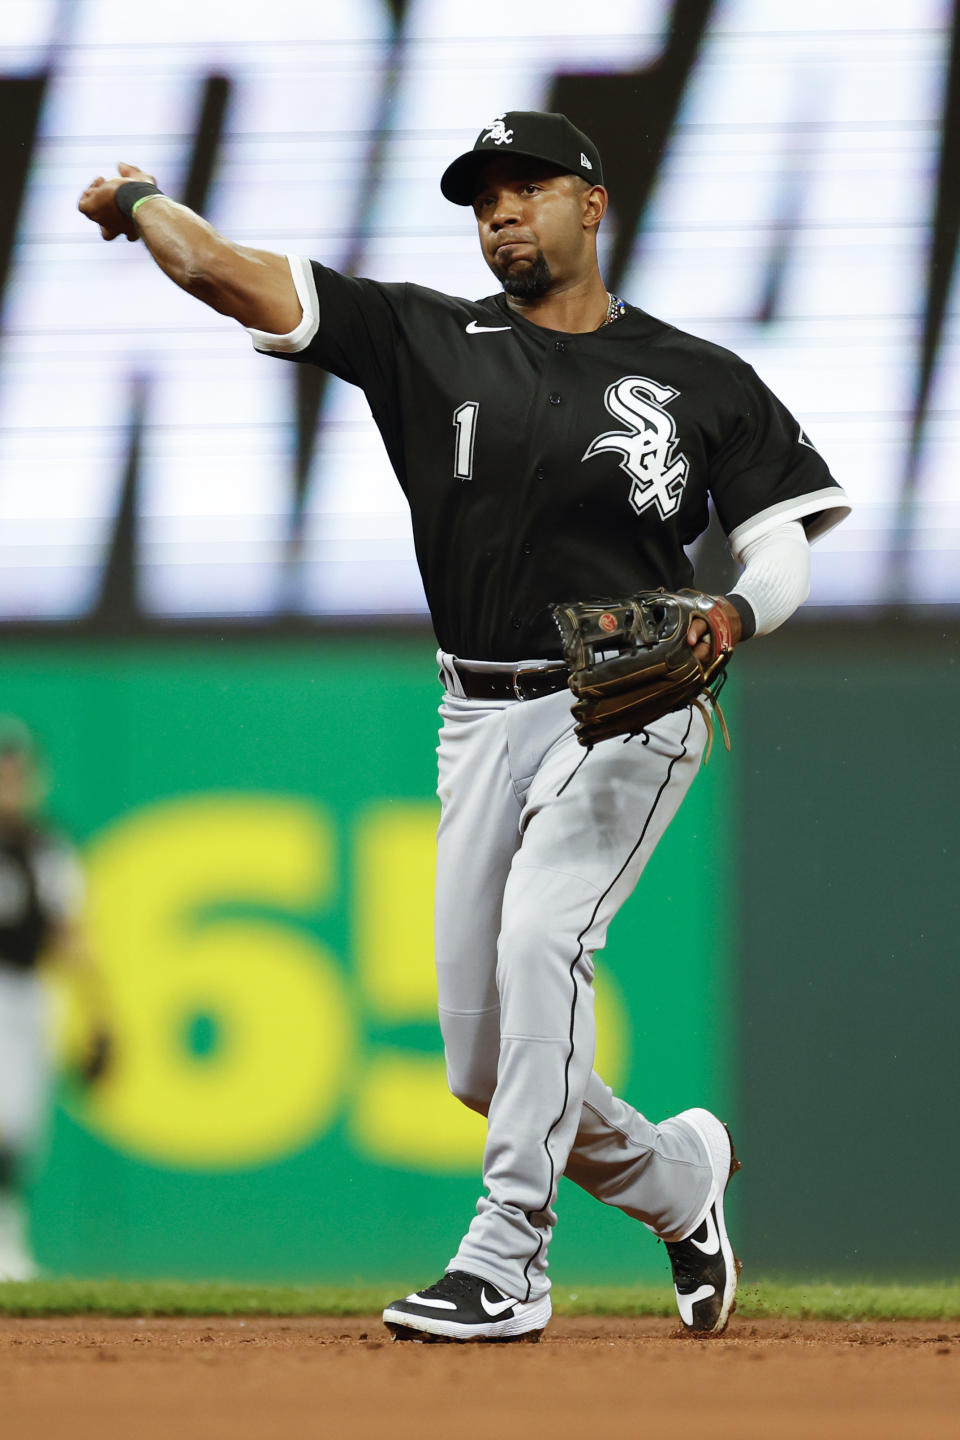 Chicago White Sox shortstop Elvis Andrus throws out Cleveland Guardians' Josh Naylor at first base during the second inning of a baseball game Saturday, Aug. 20, 2022, in Cleveland. (AP Photo/Ron Schwane)